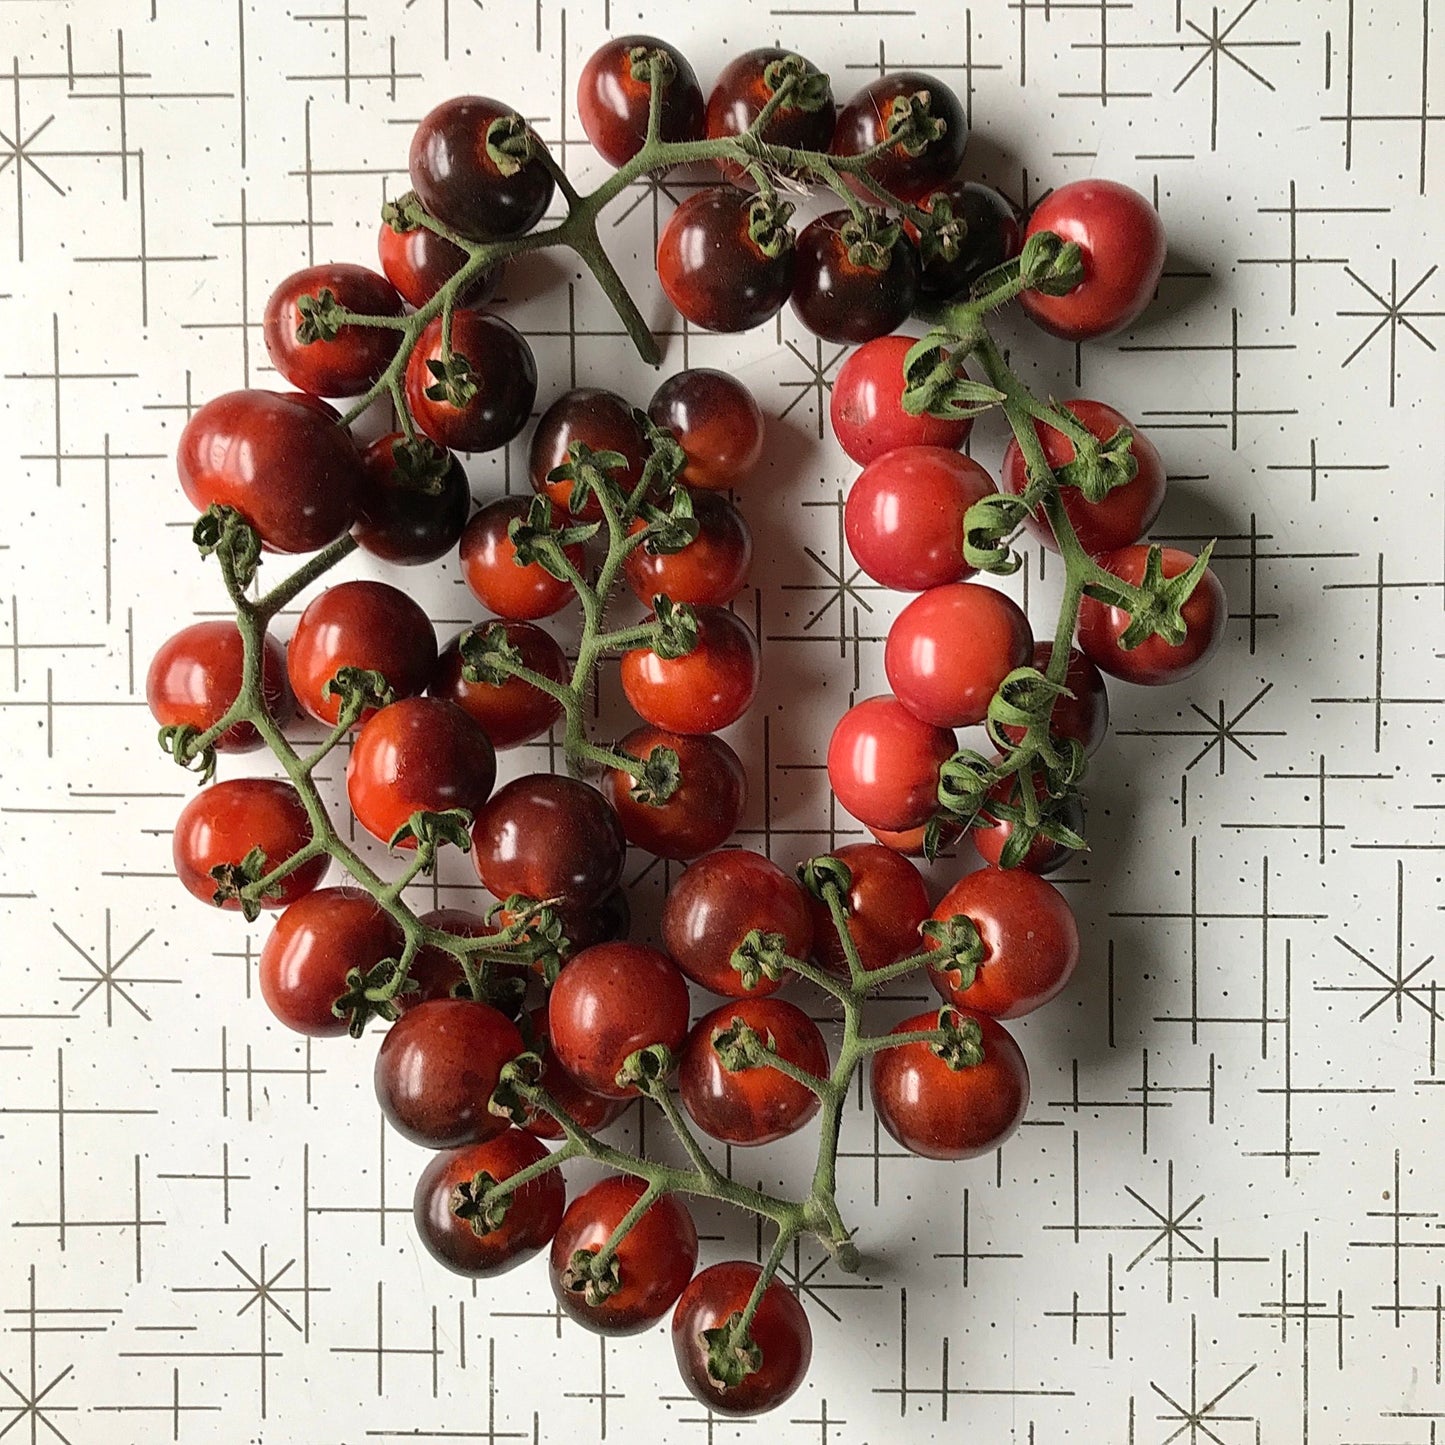 Red cherry tomatoes with antho shoulders still on the vine arranged in a circle.